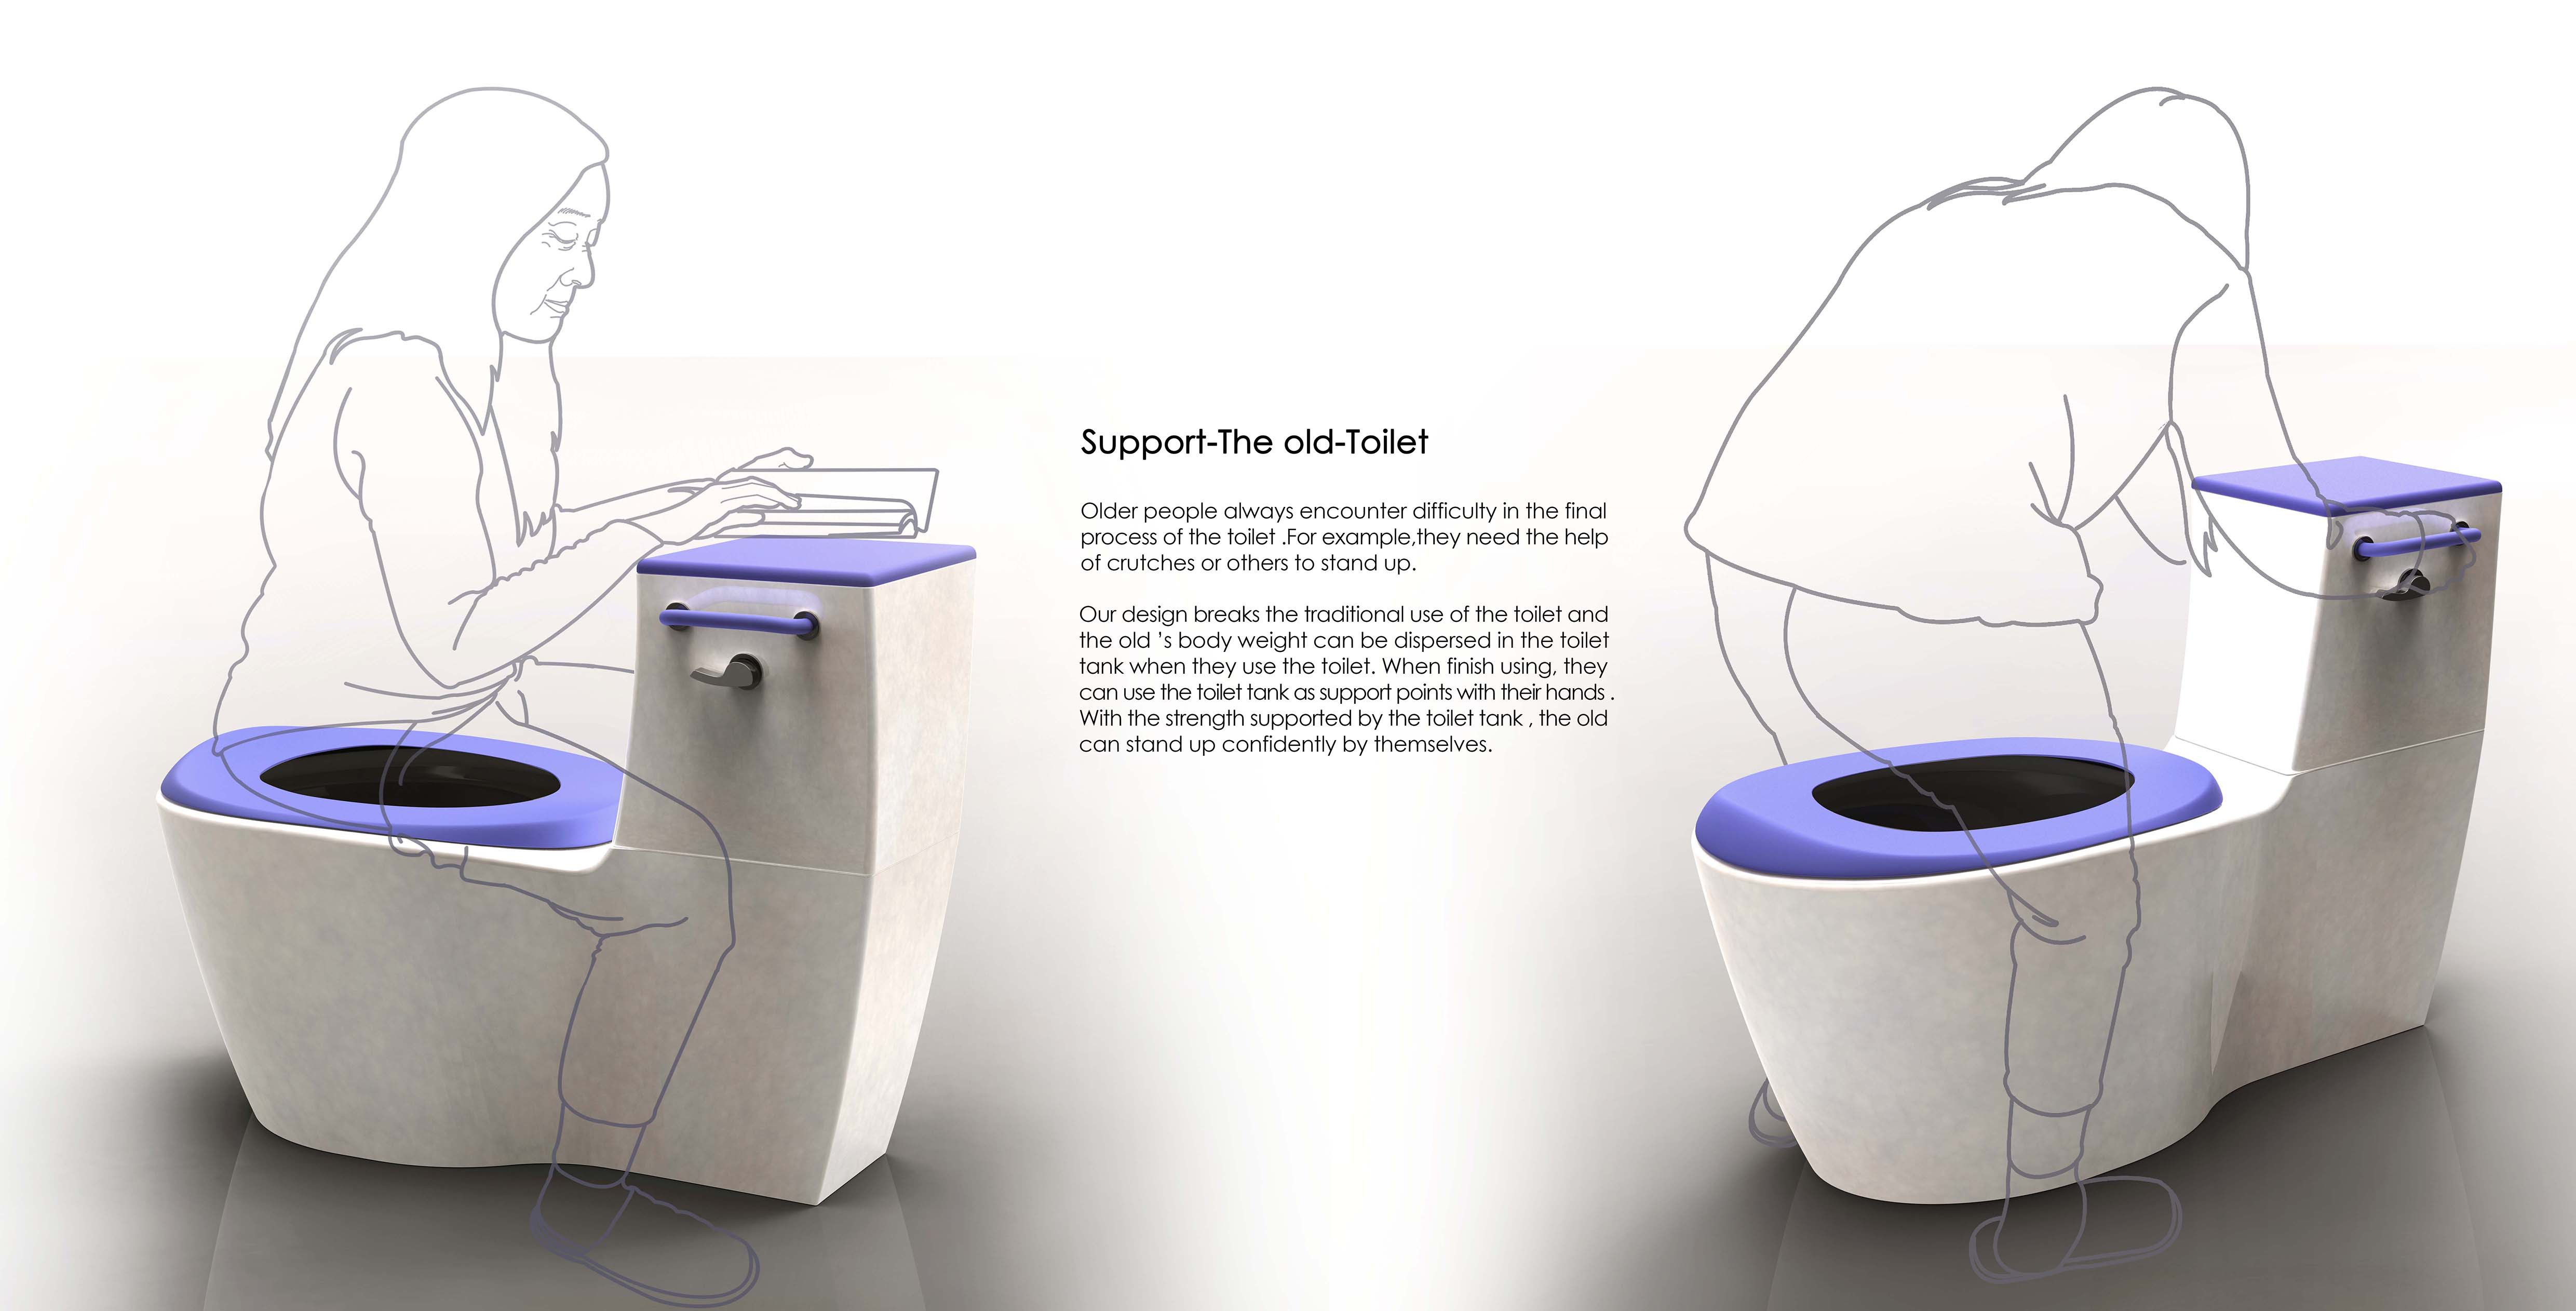 Support-The old-Toilet